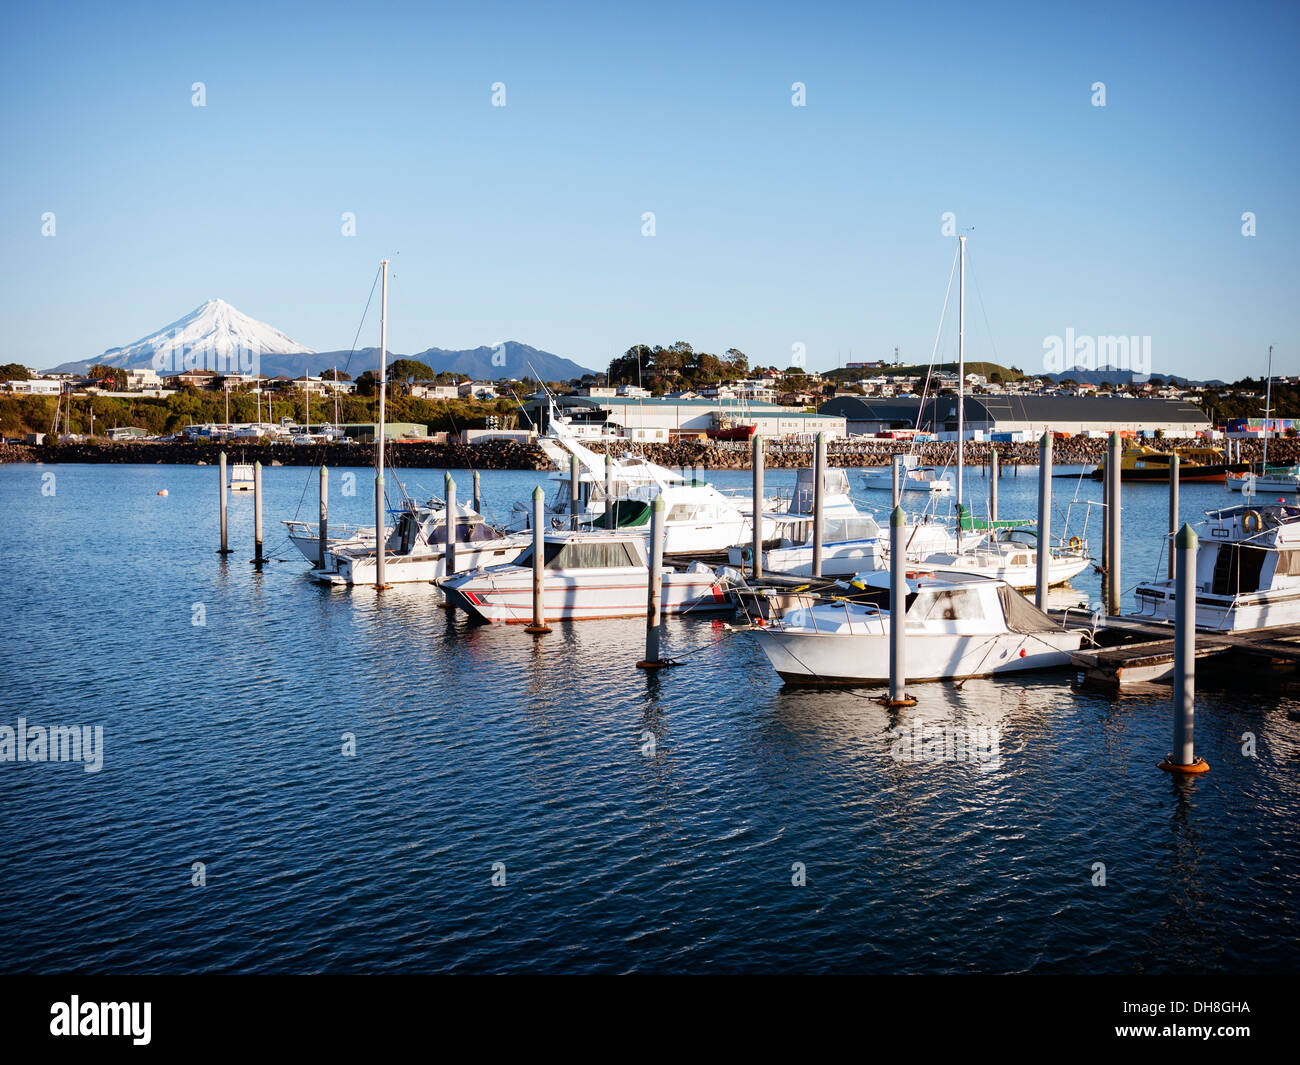 Perfect cone volcano: Mount Egmont, Taranaki. New Plymouth harbour. New Zealand. Boat names and logos removed. Stock Photo